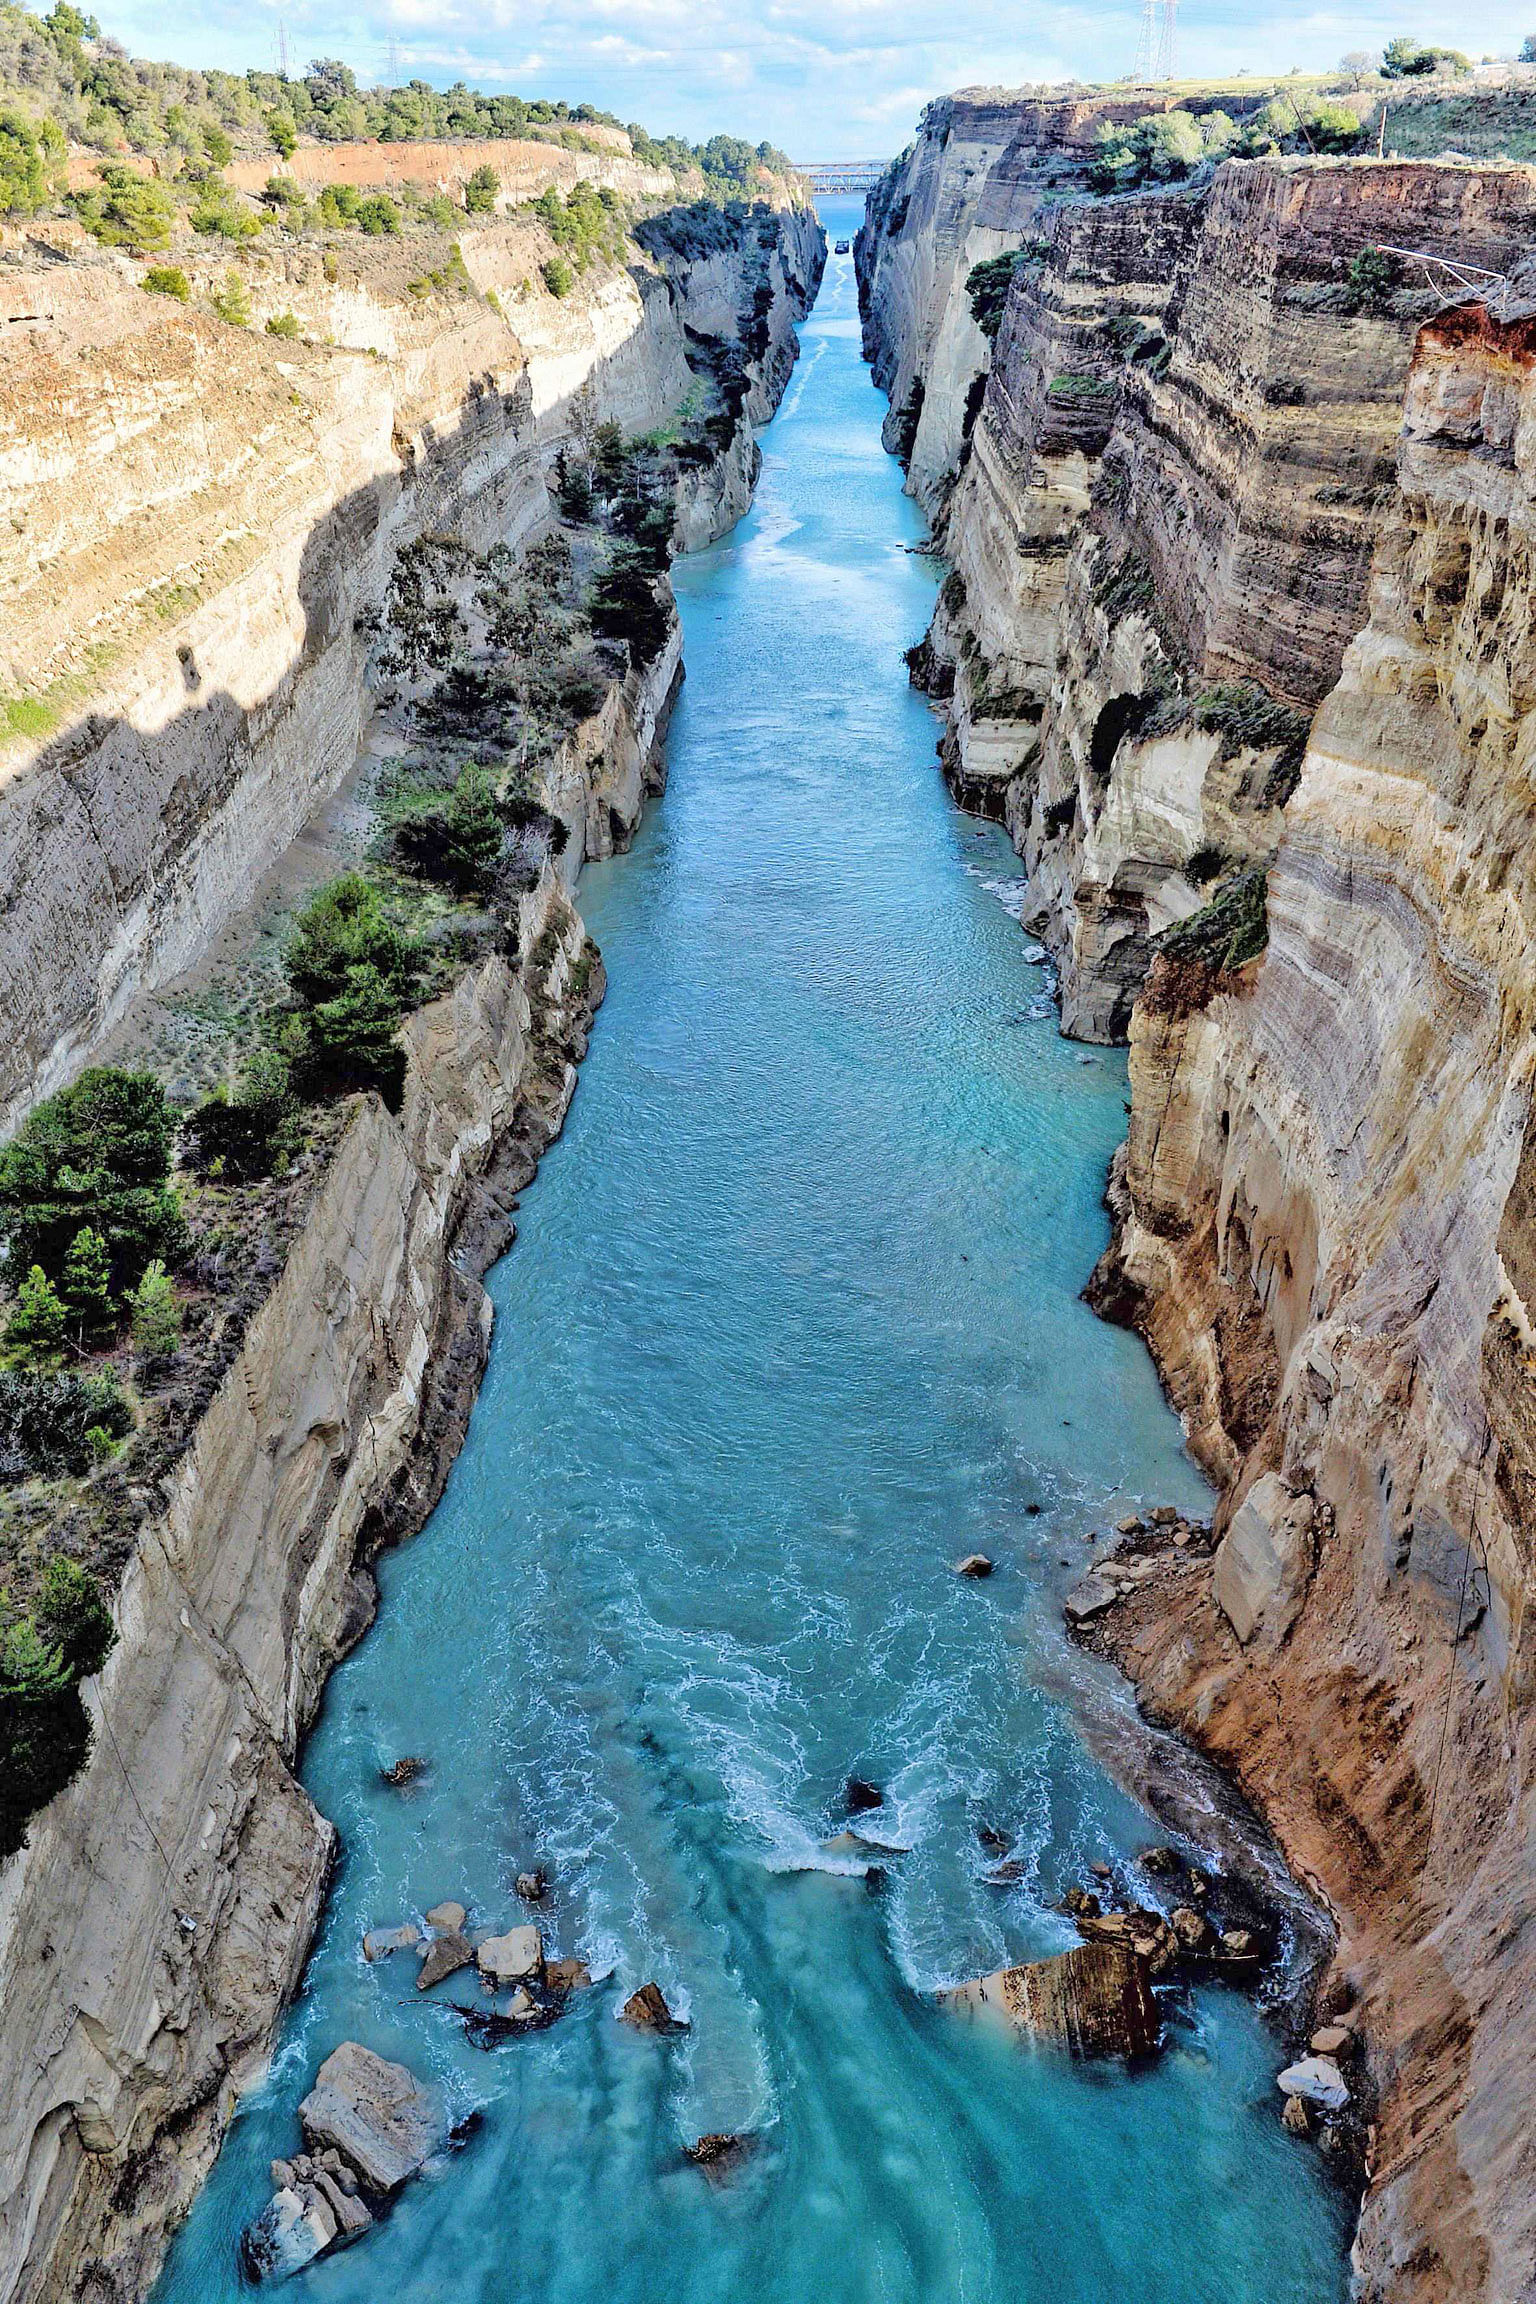 Greece has closed the Corinth canal after a rockfall that followed heavy rain, temporarily blocking a transit route used mainly by commercial ships and pleasure yachts. The 6.4km canal serves about 11,000 ships a year, offering a short transit from s